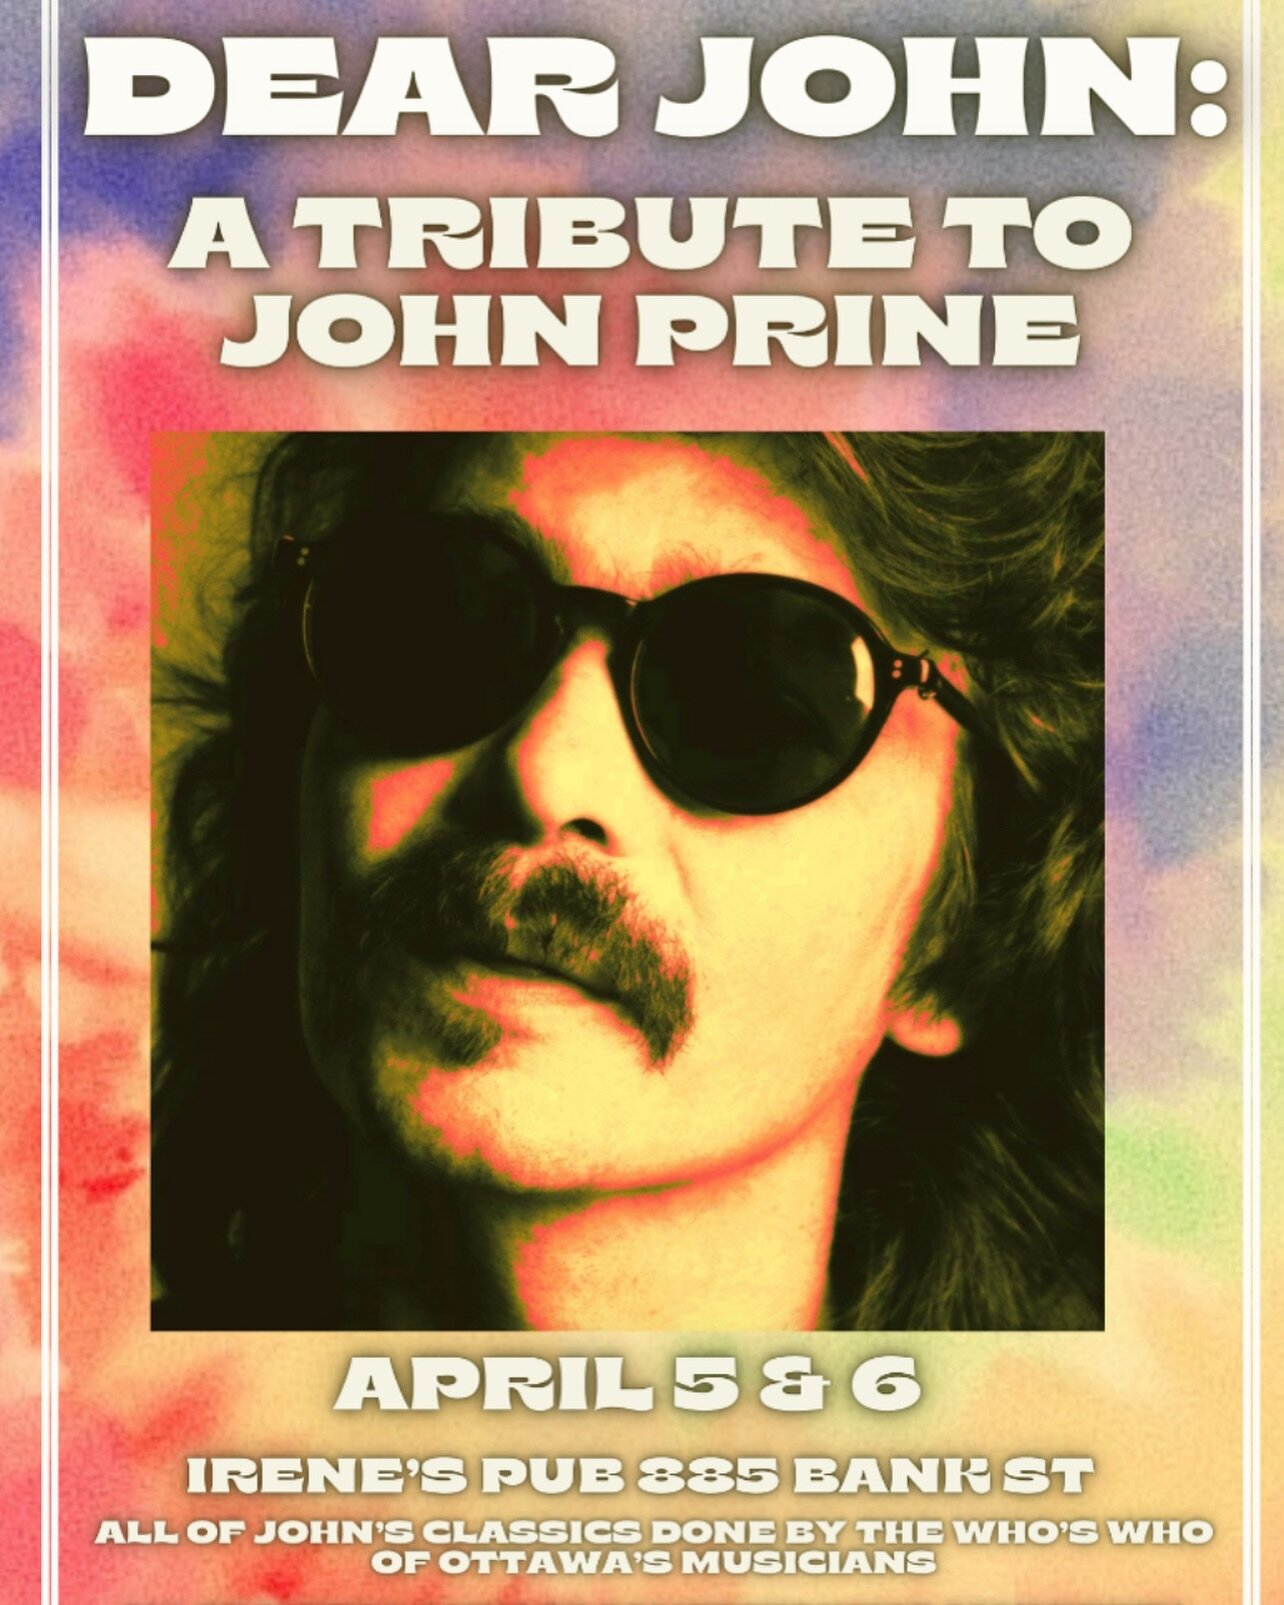 John Prine weekend is fast approaching ! There are some tickets left for each night. Grab them in the link in bio before they&rsquo;re gone ! #johnprine #johnprinetribute #livemusic #ottawamusic #livemusicottawa #ottmusic #myottawa